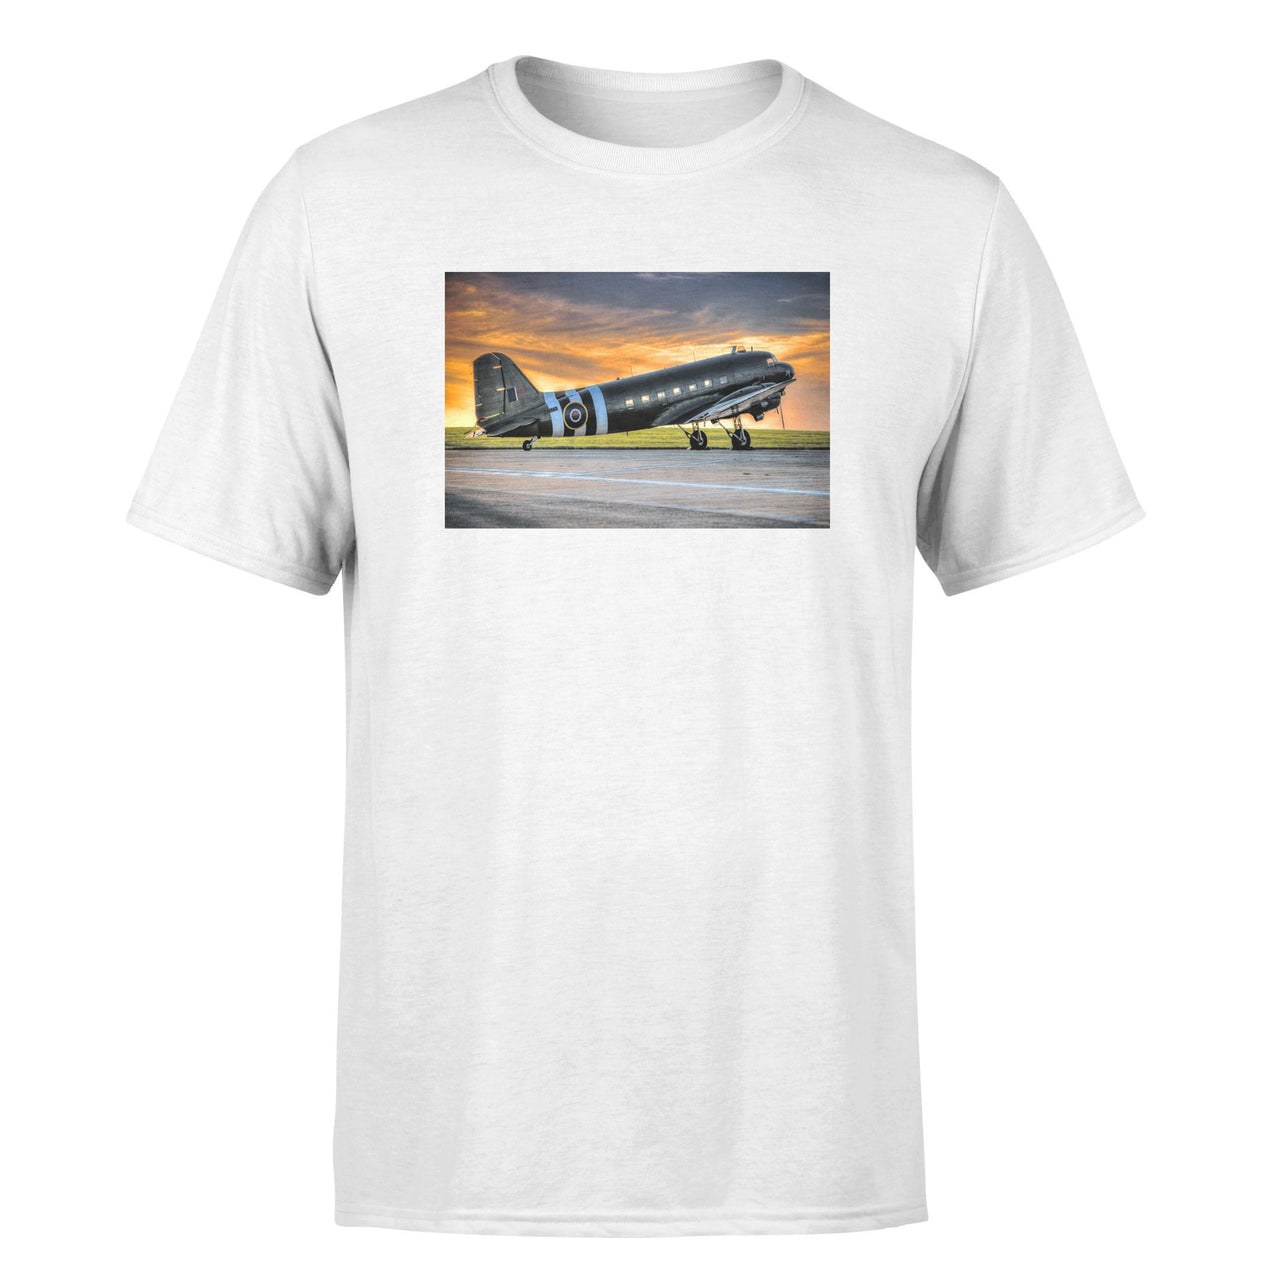 Old Airplane Parked During Sunset Designed T-Shirts